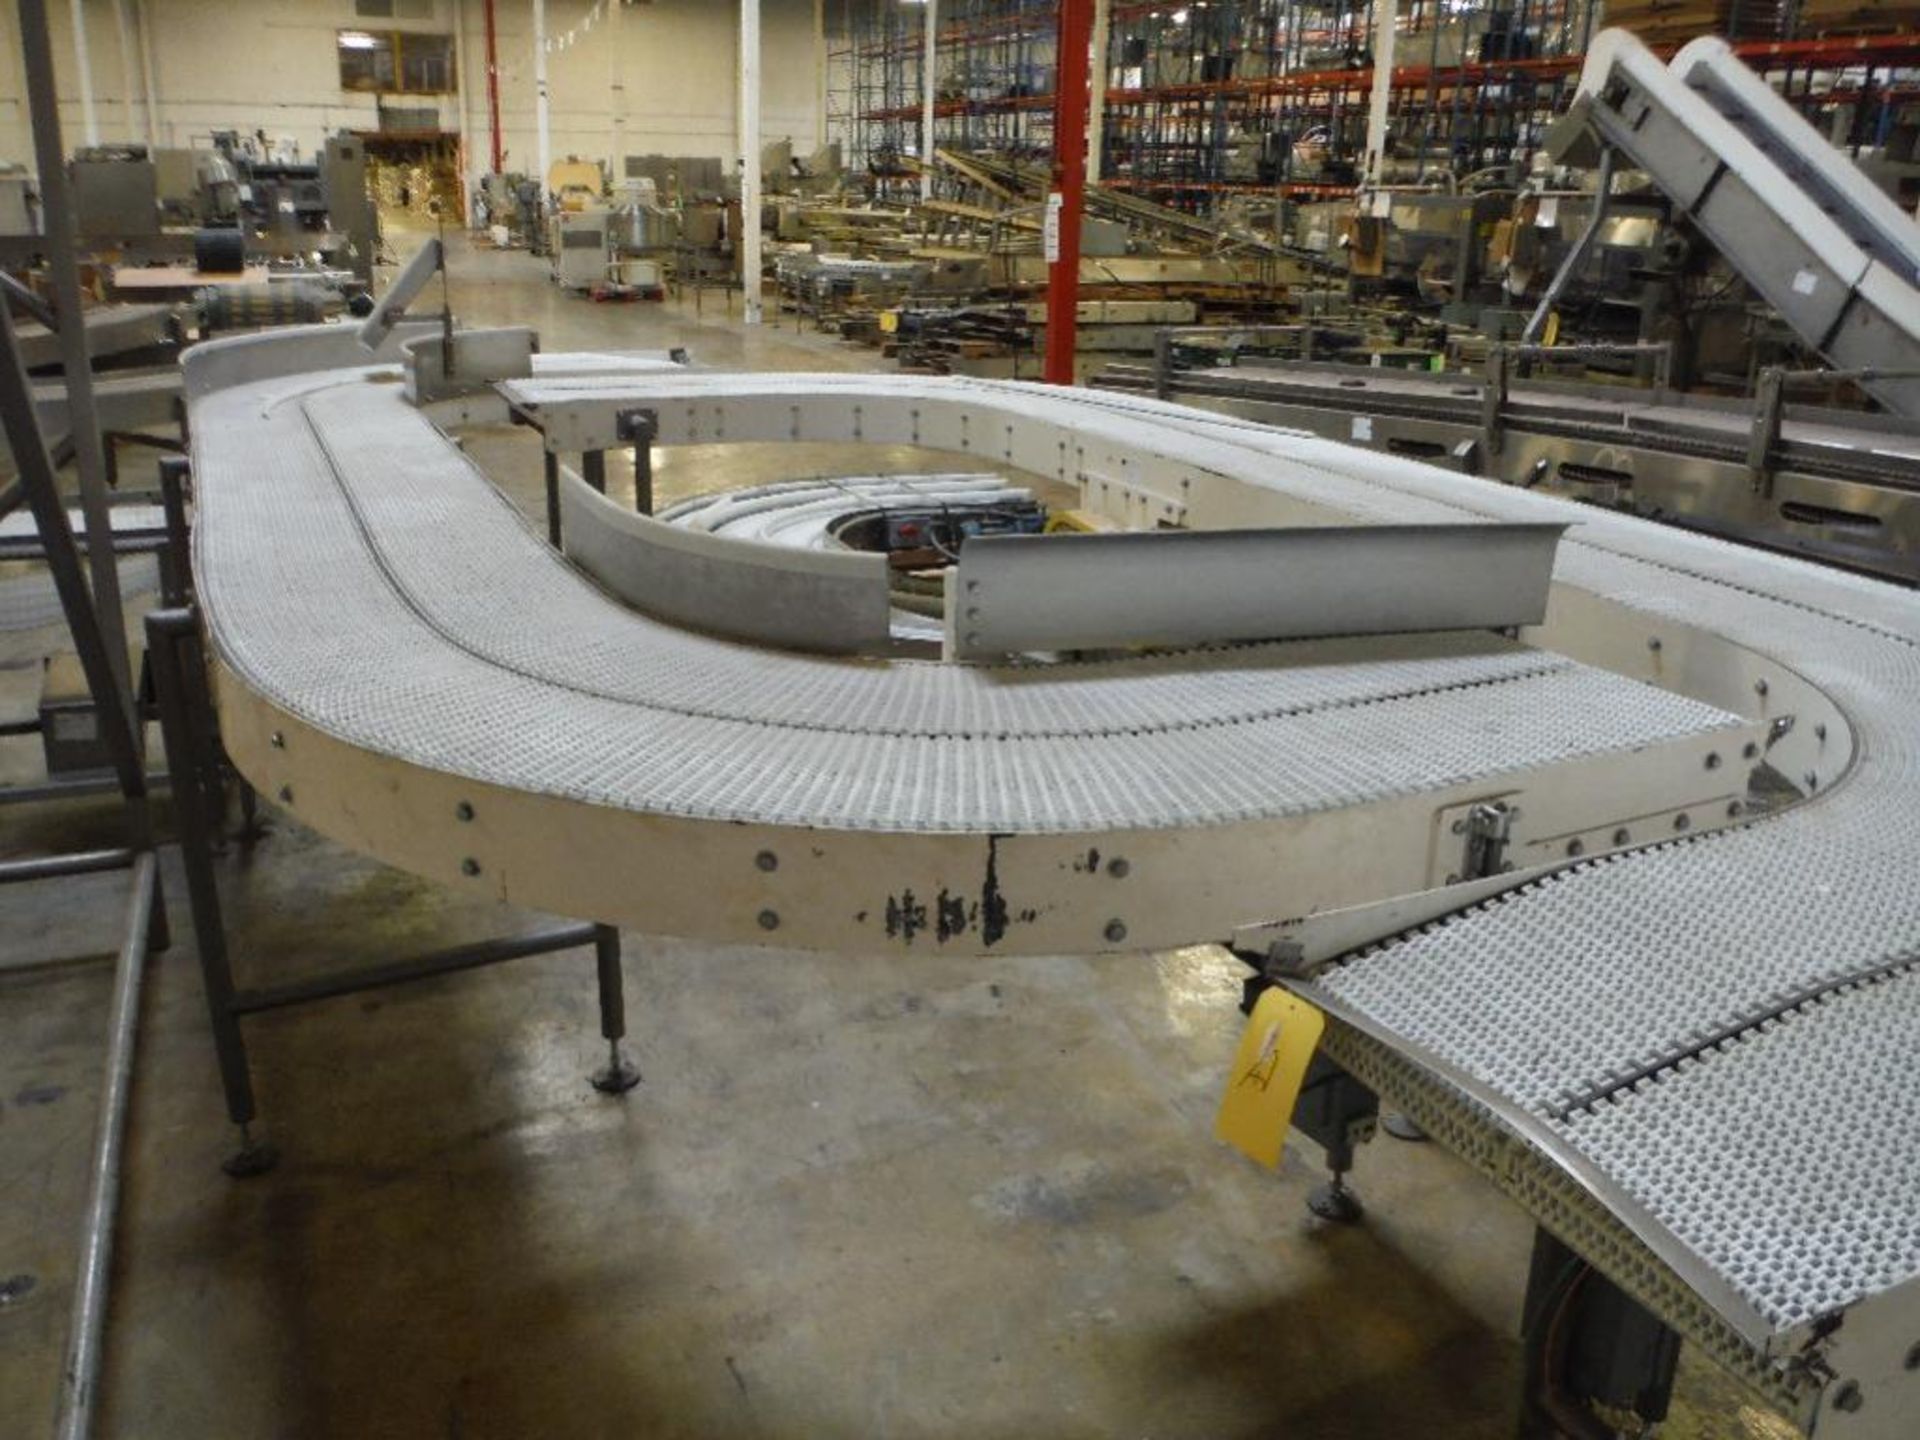 180 degree dual lane conveyor, 11.5 in. wide each, overall 192 in. long x 46 in. tall, carbon steel - Image 3 of 6